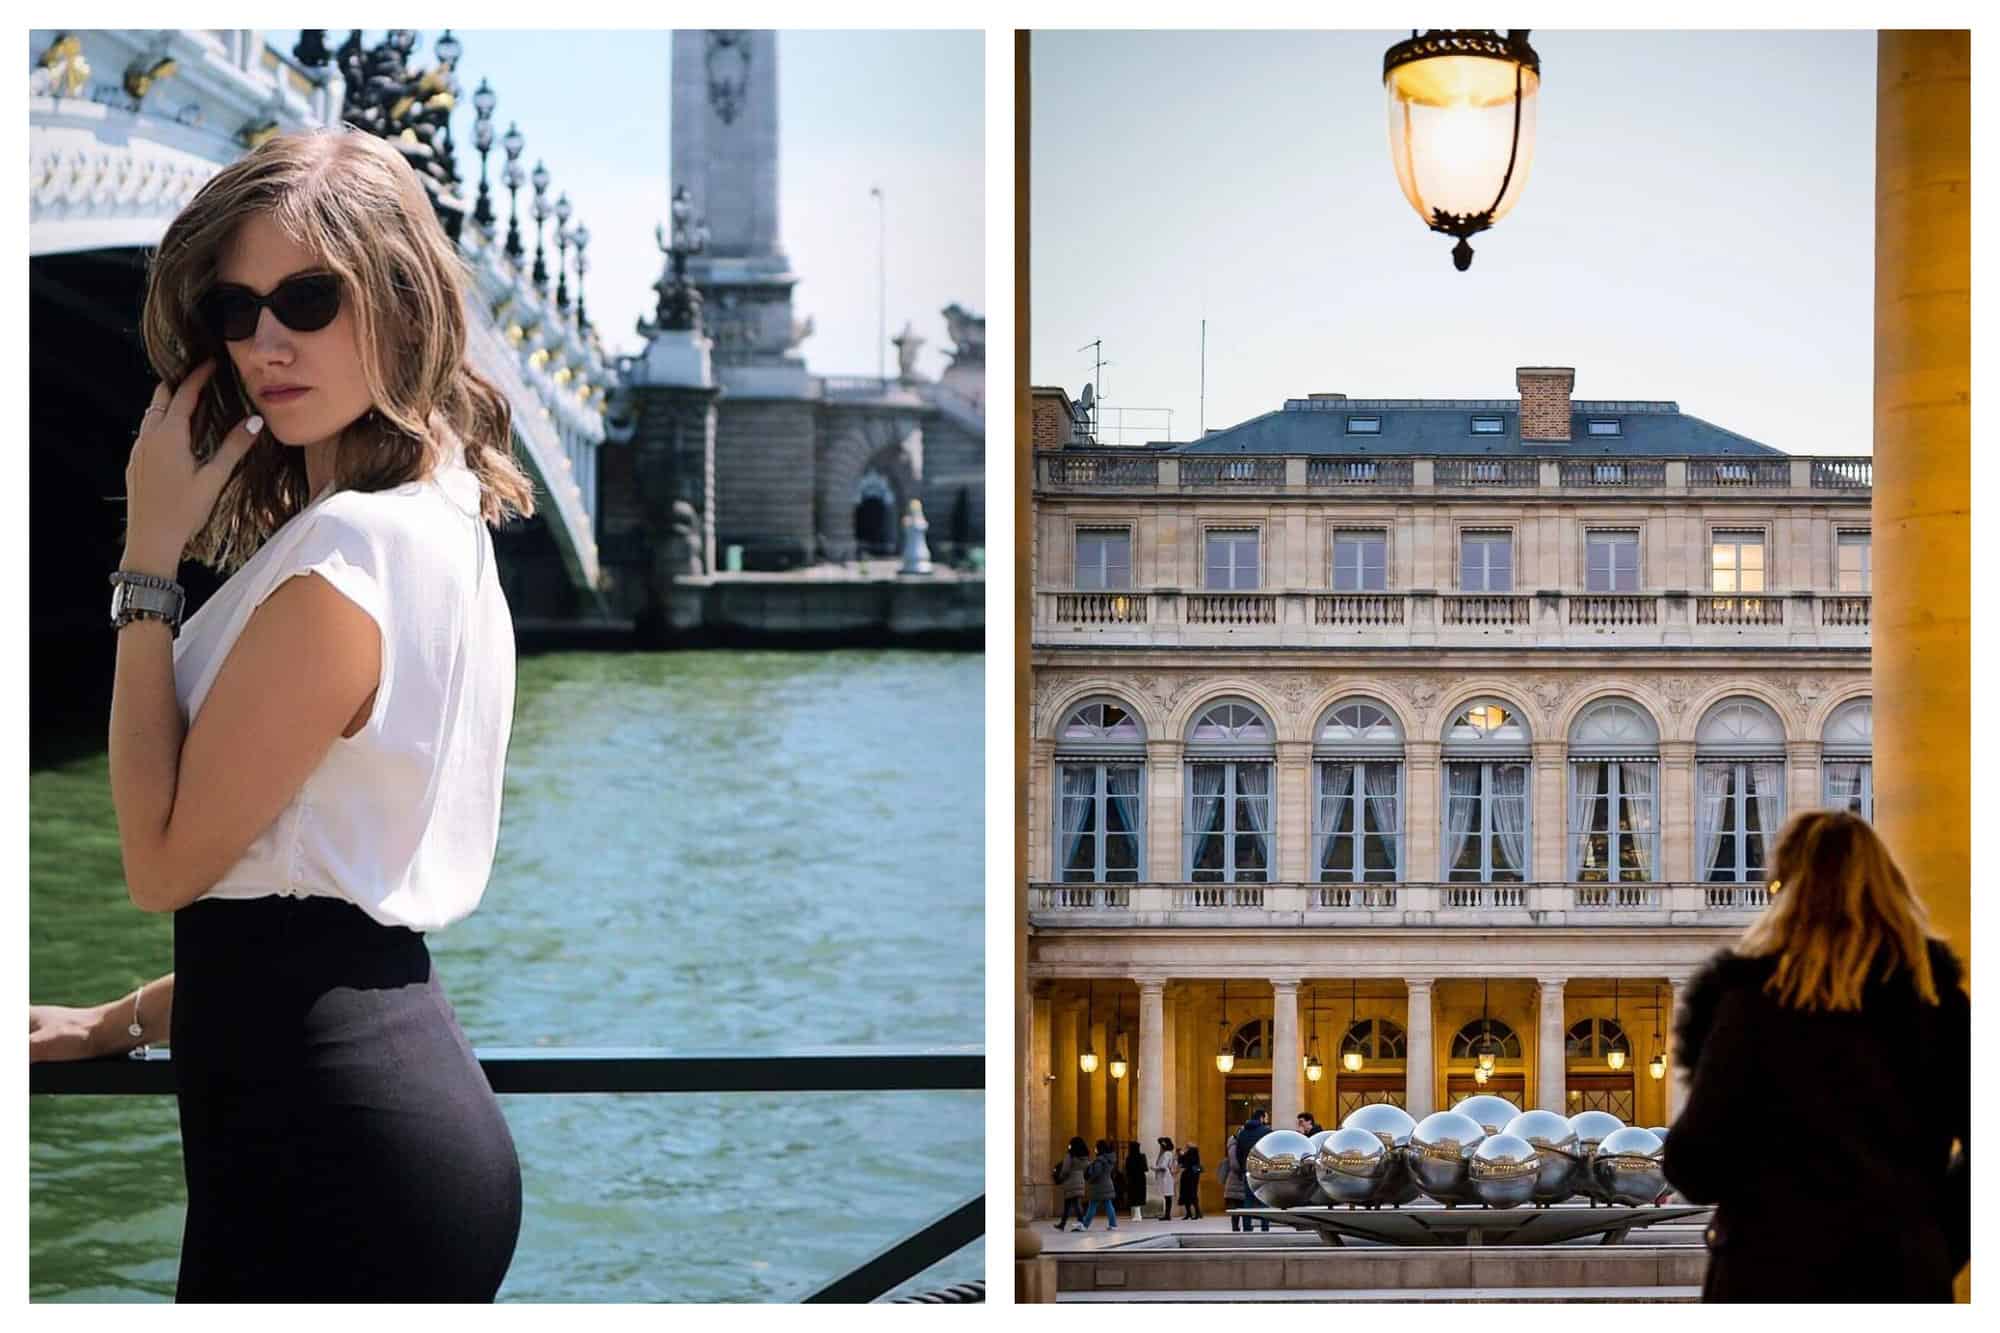 Left- A woman wearing sunglasses looks over her shoulder in a white blouse and black bottom. 
right- A woman standws in a black coat looking at a Paris building.